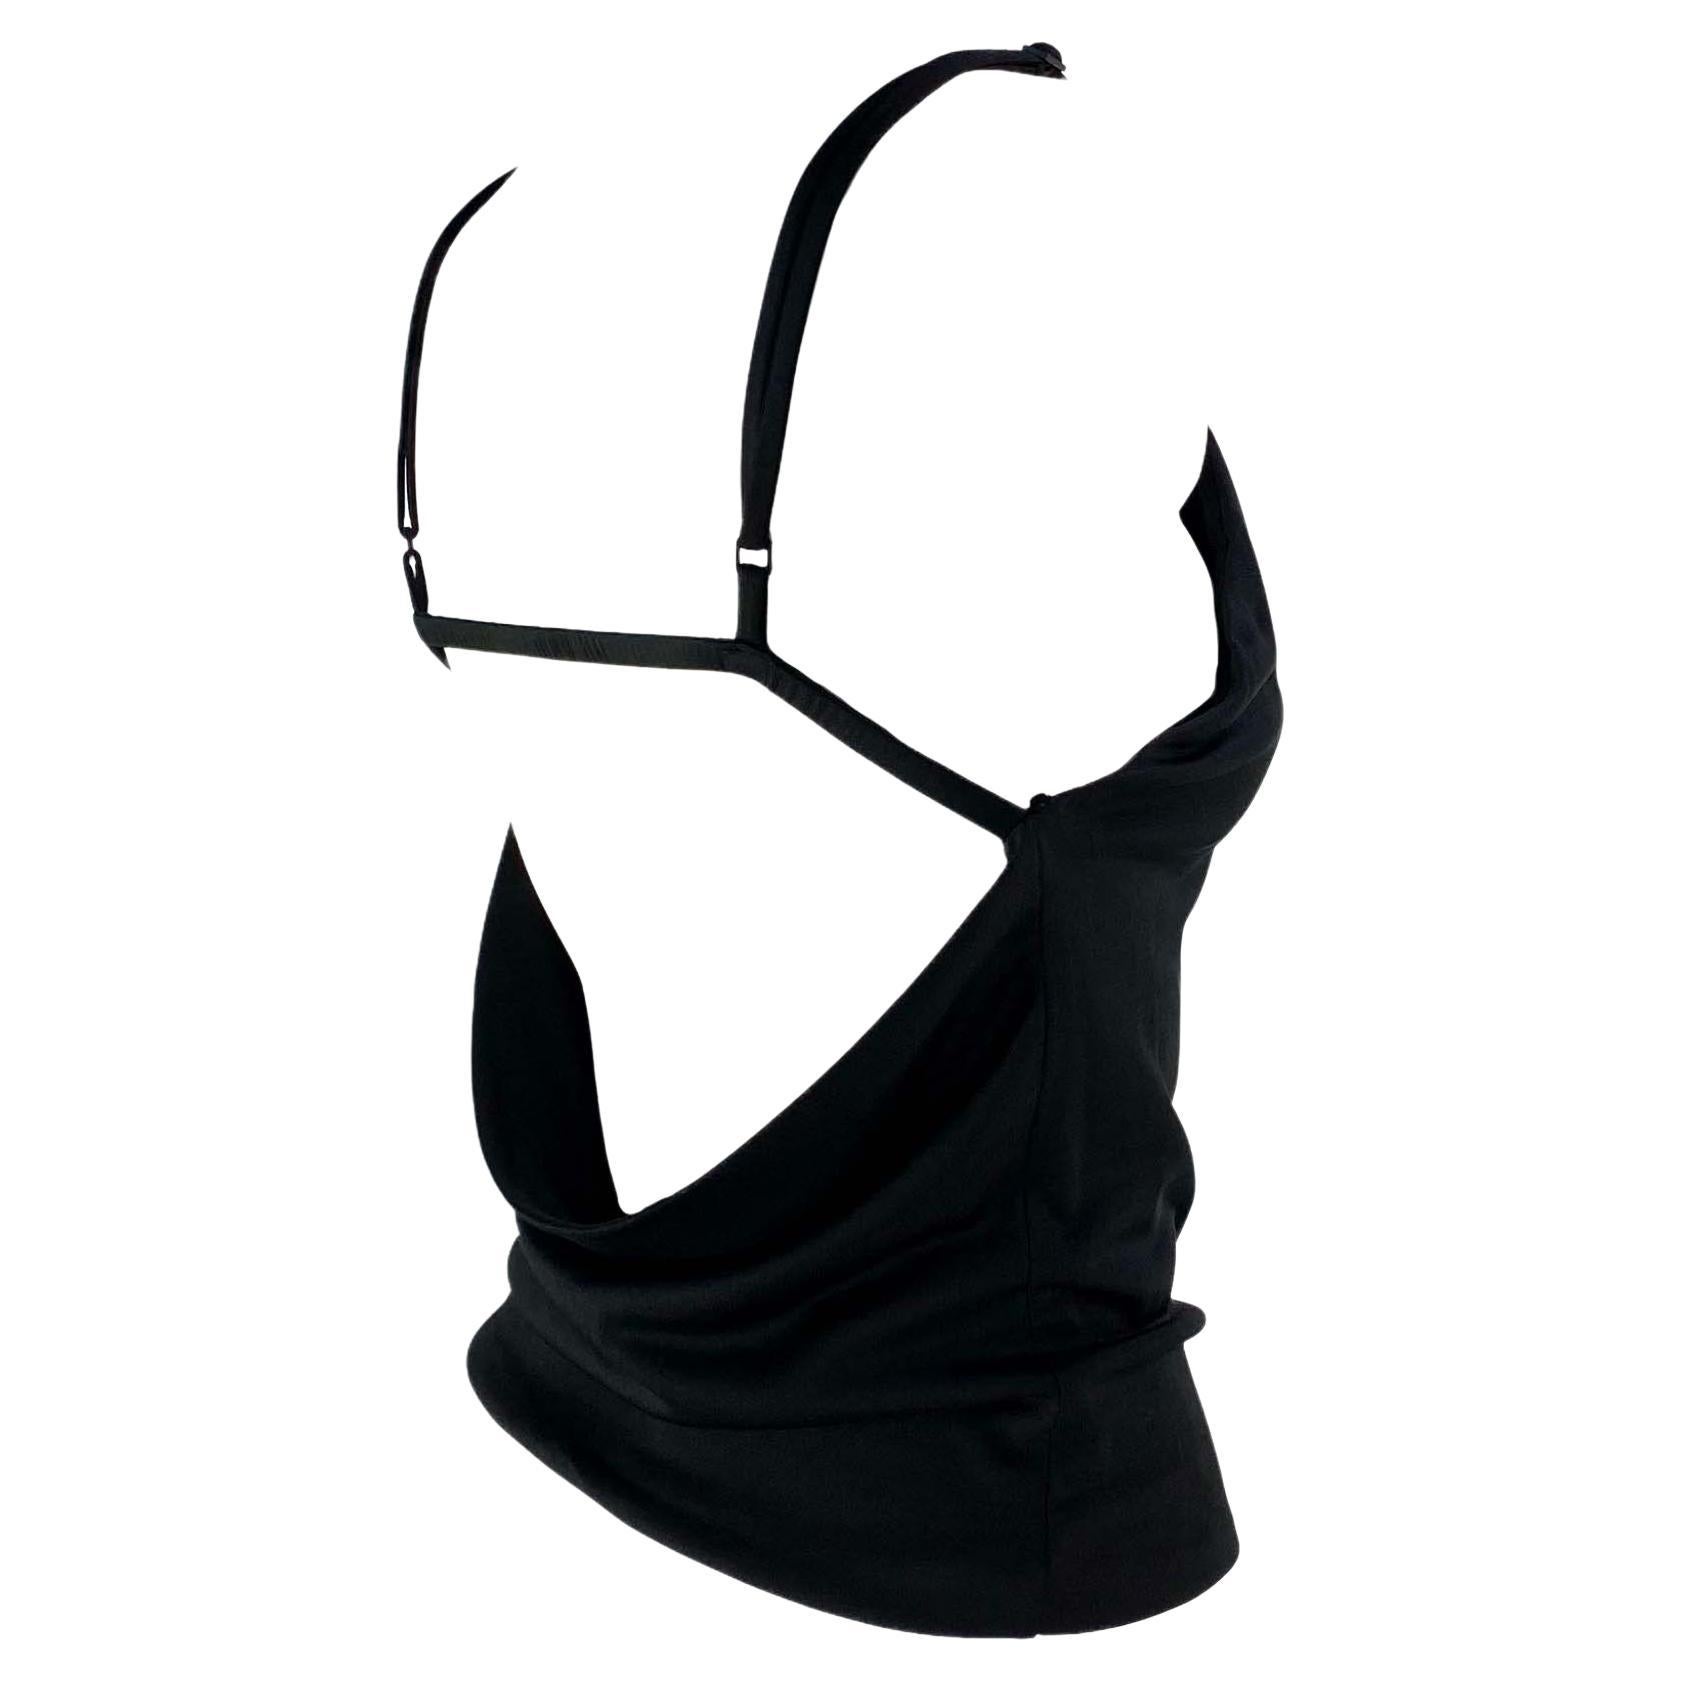 S/S 2001 Gucci by Tom Ford Backless Bra Strap Black Top